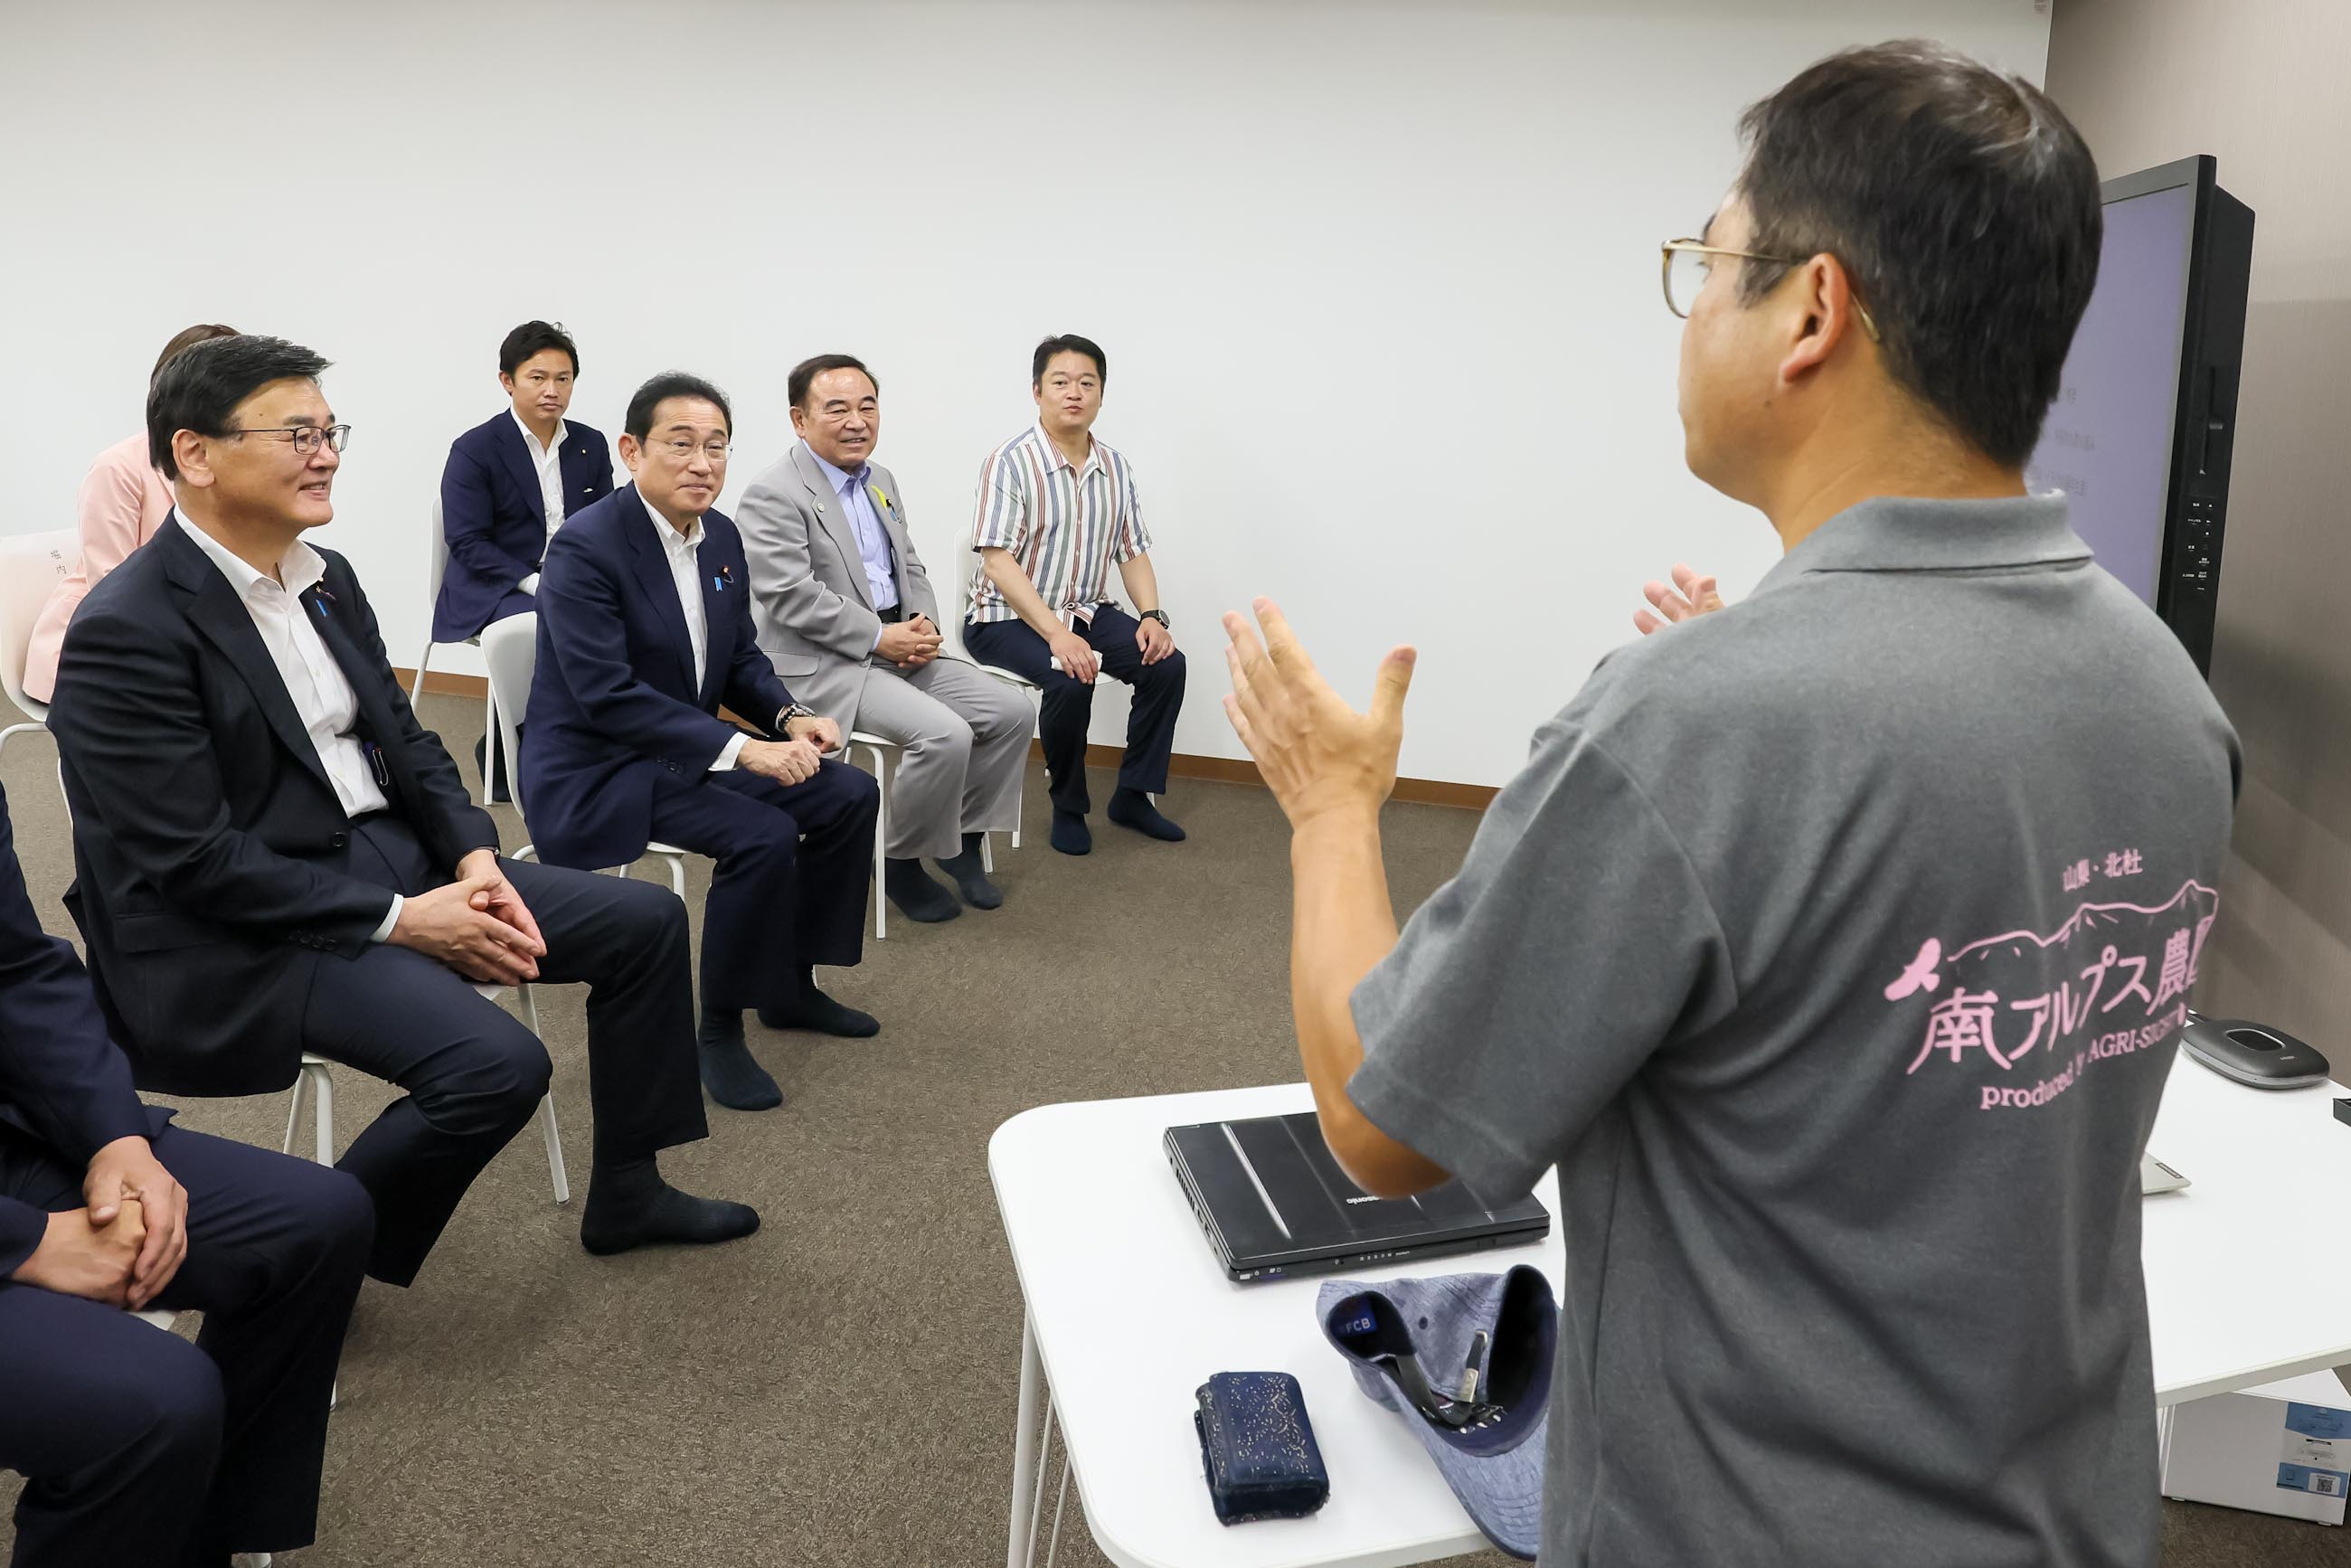 Prime Minister Kishida being briefed at a tomato growing company (1)